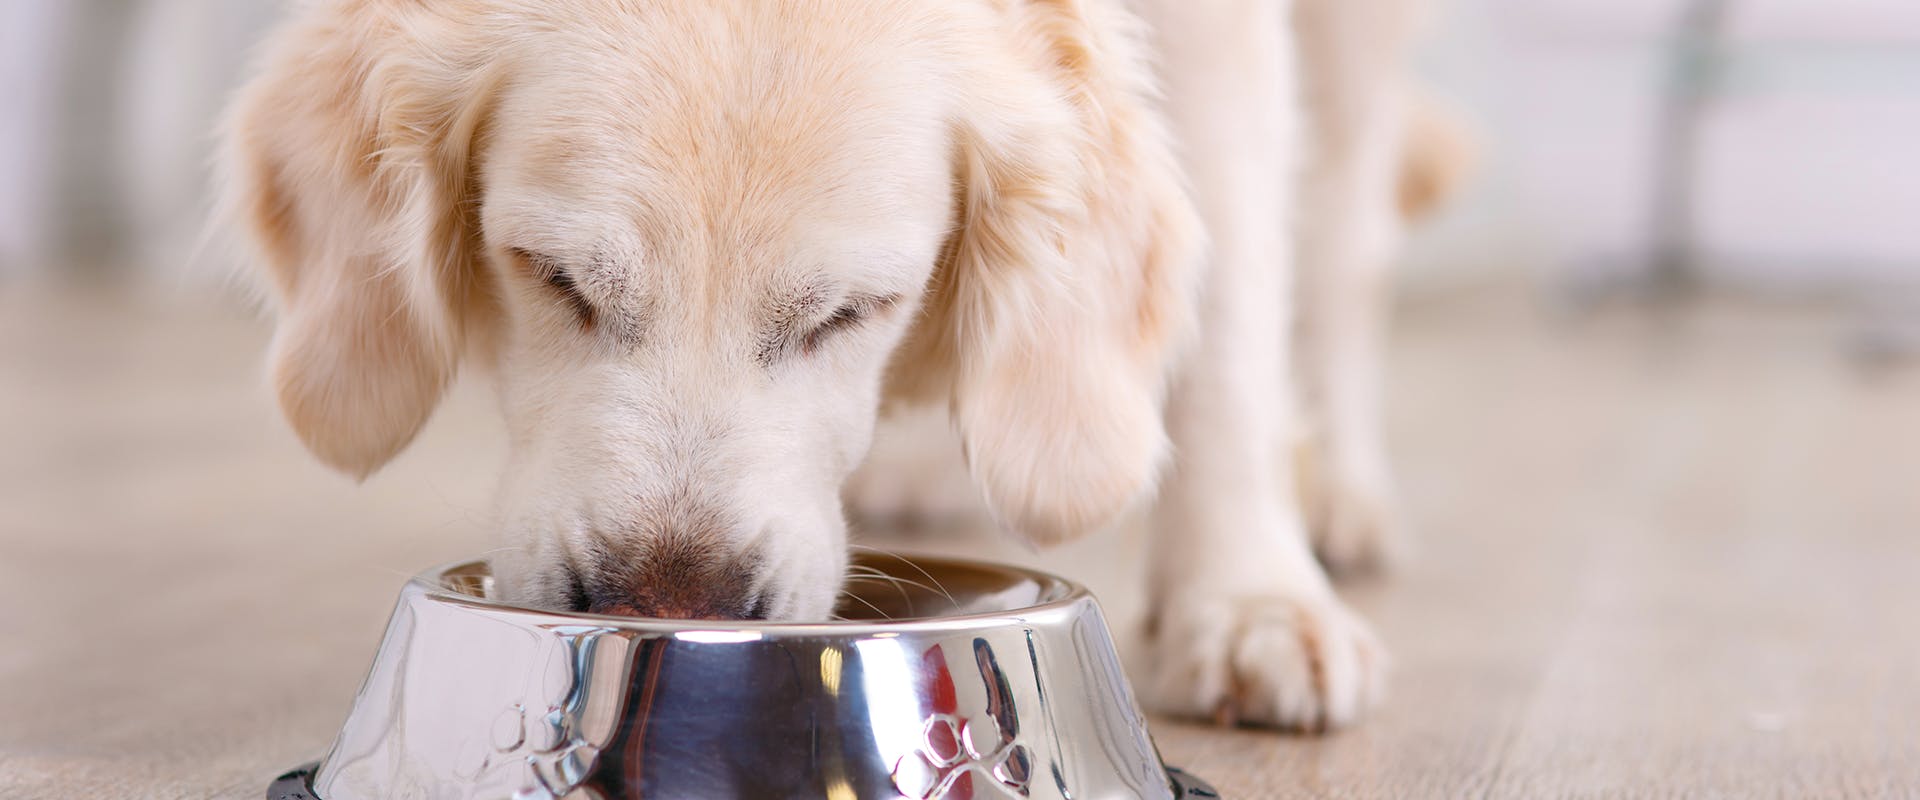 A young puppy eating from a dog bowl